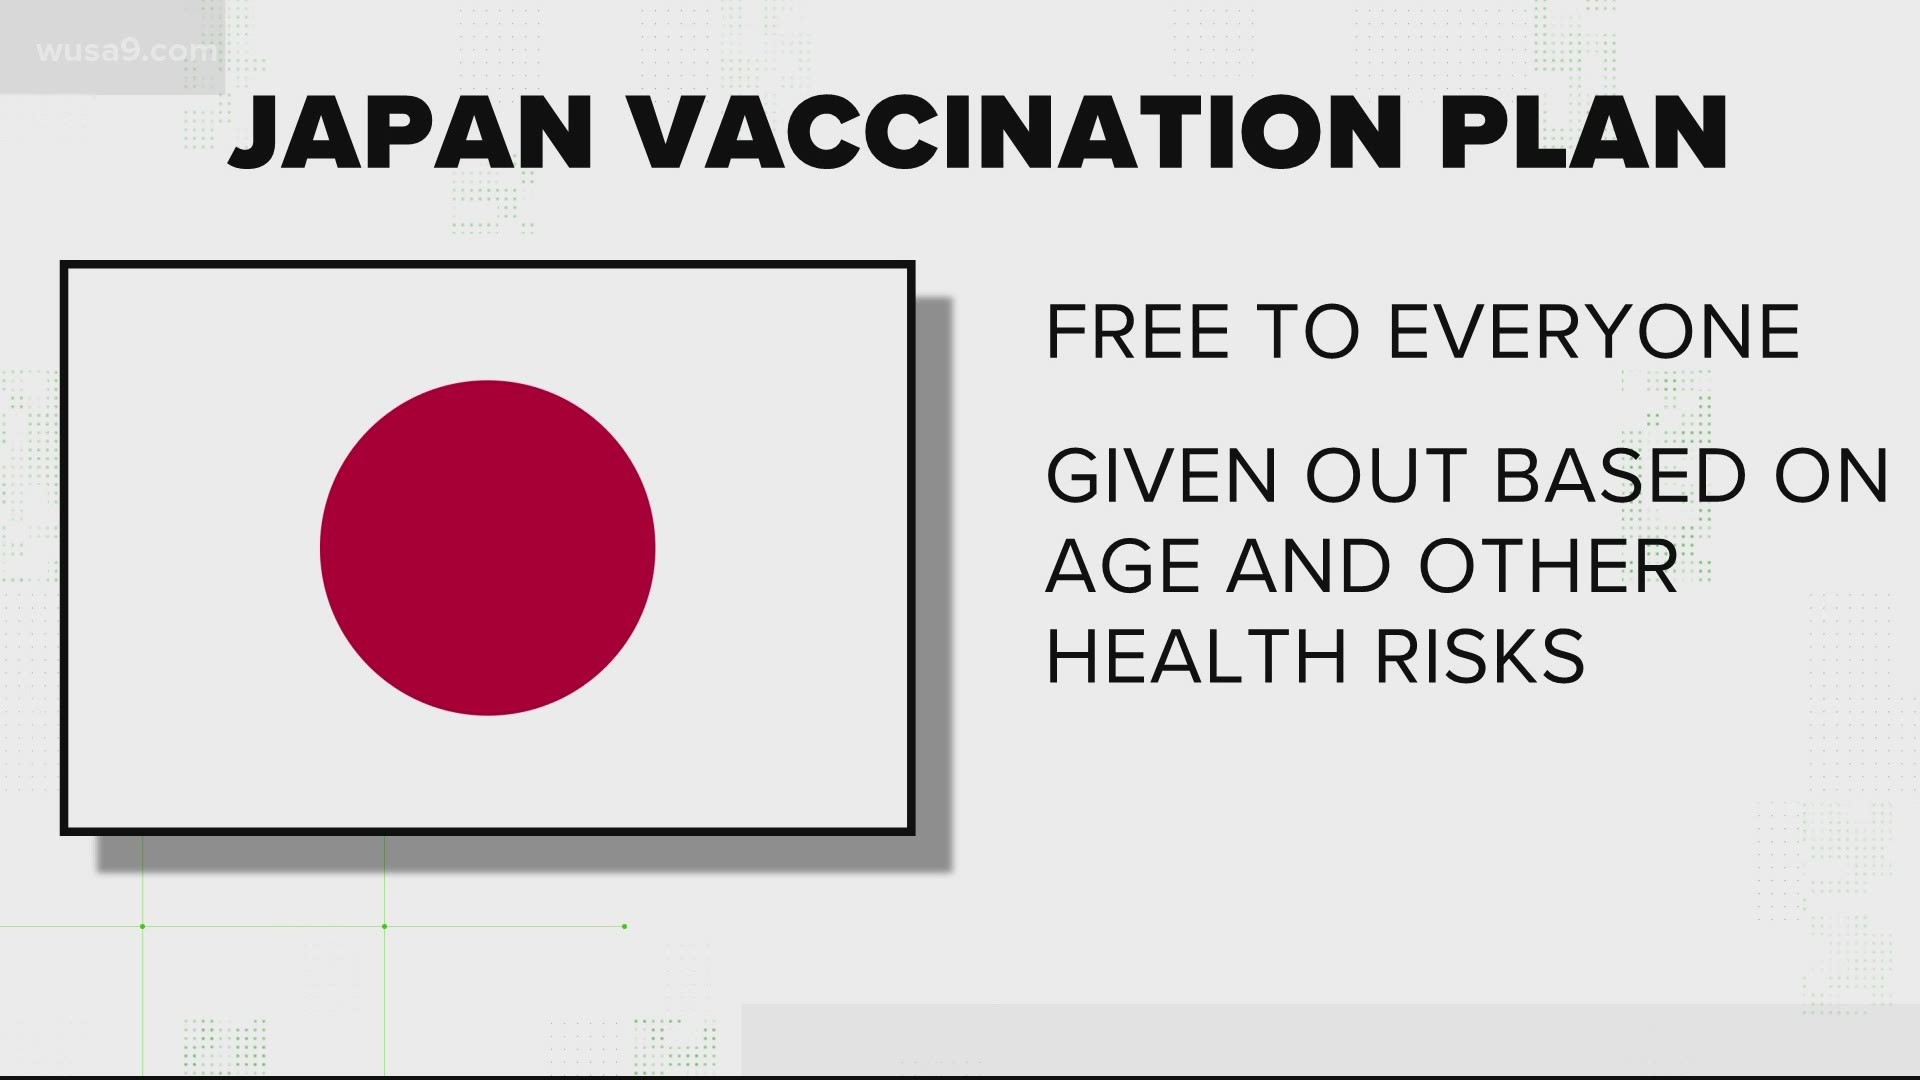 The claim that Japan has no vaccination plan is false. It's just delayed compared to the United States.